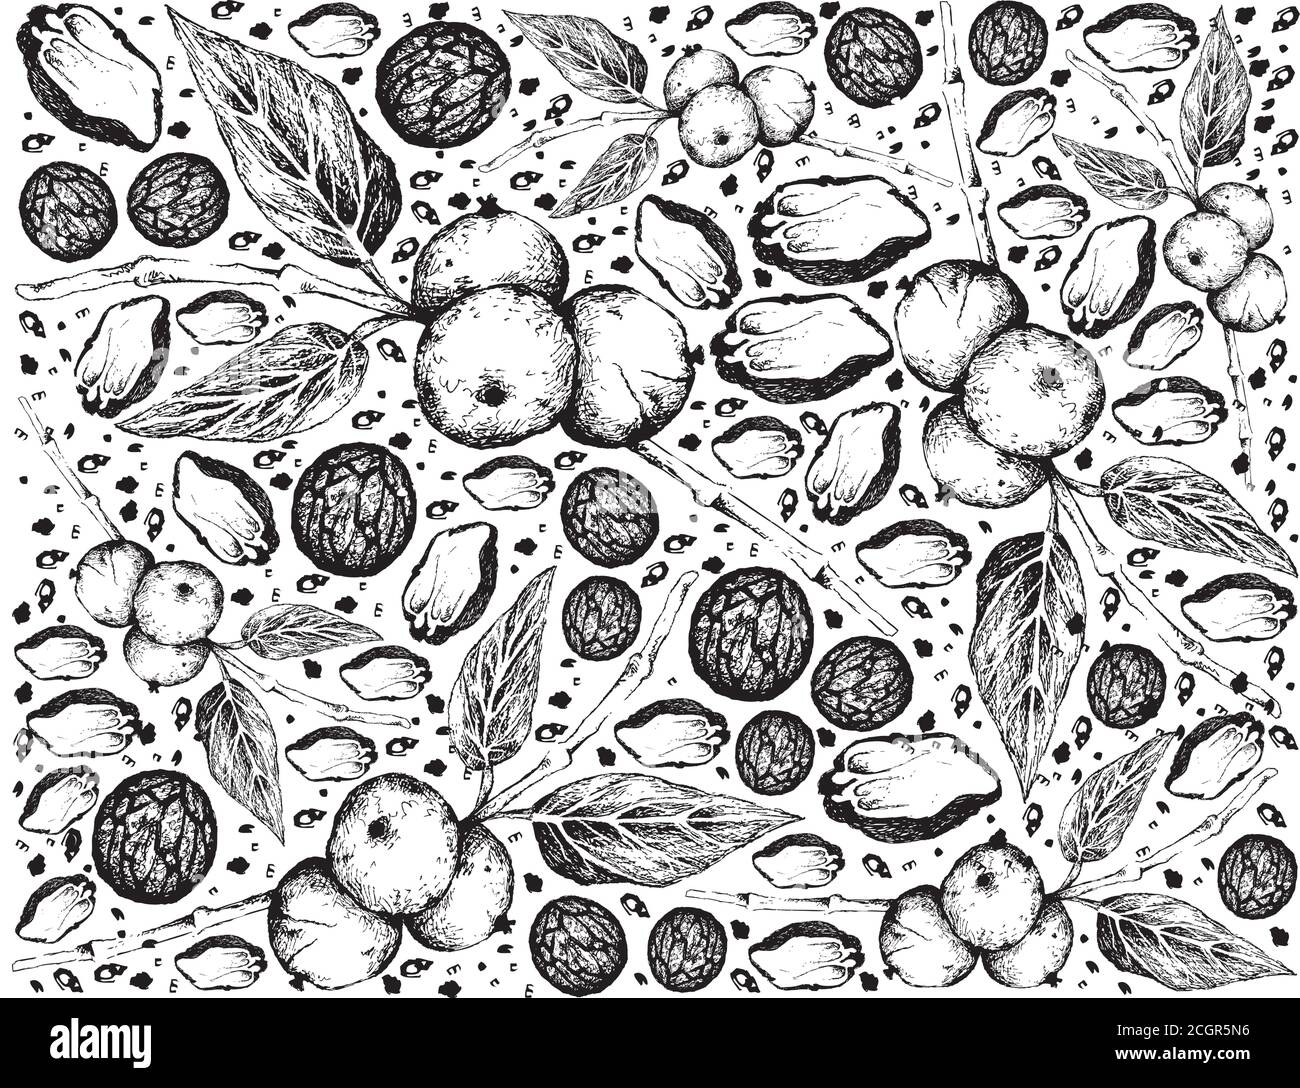 Illustration Hand Drawn Sketch Background of Black Walnuts or Juglans Nigra on A Tree, A Popular Ingredient to Recipes Like Bakery and Desserts. Stock Vector